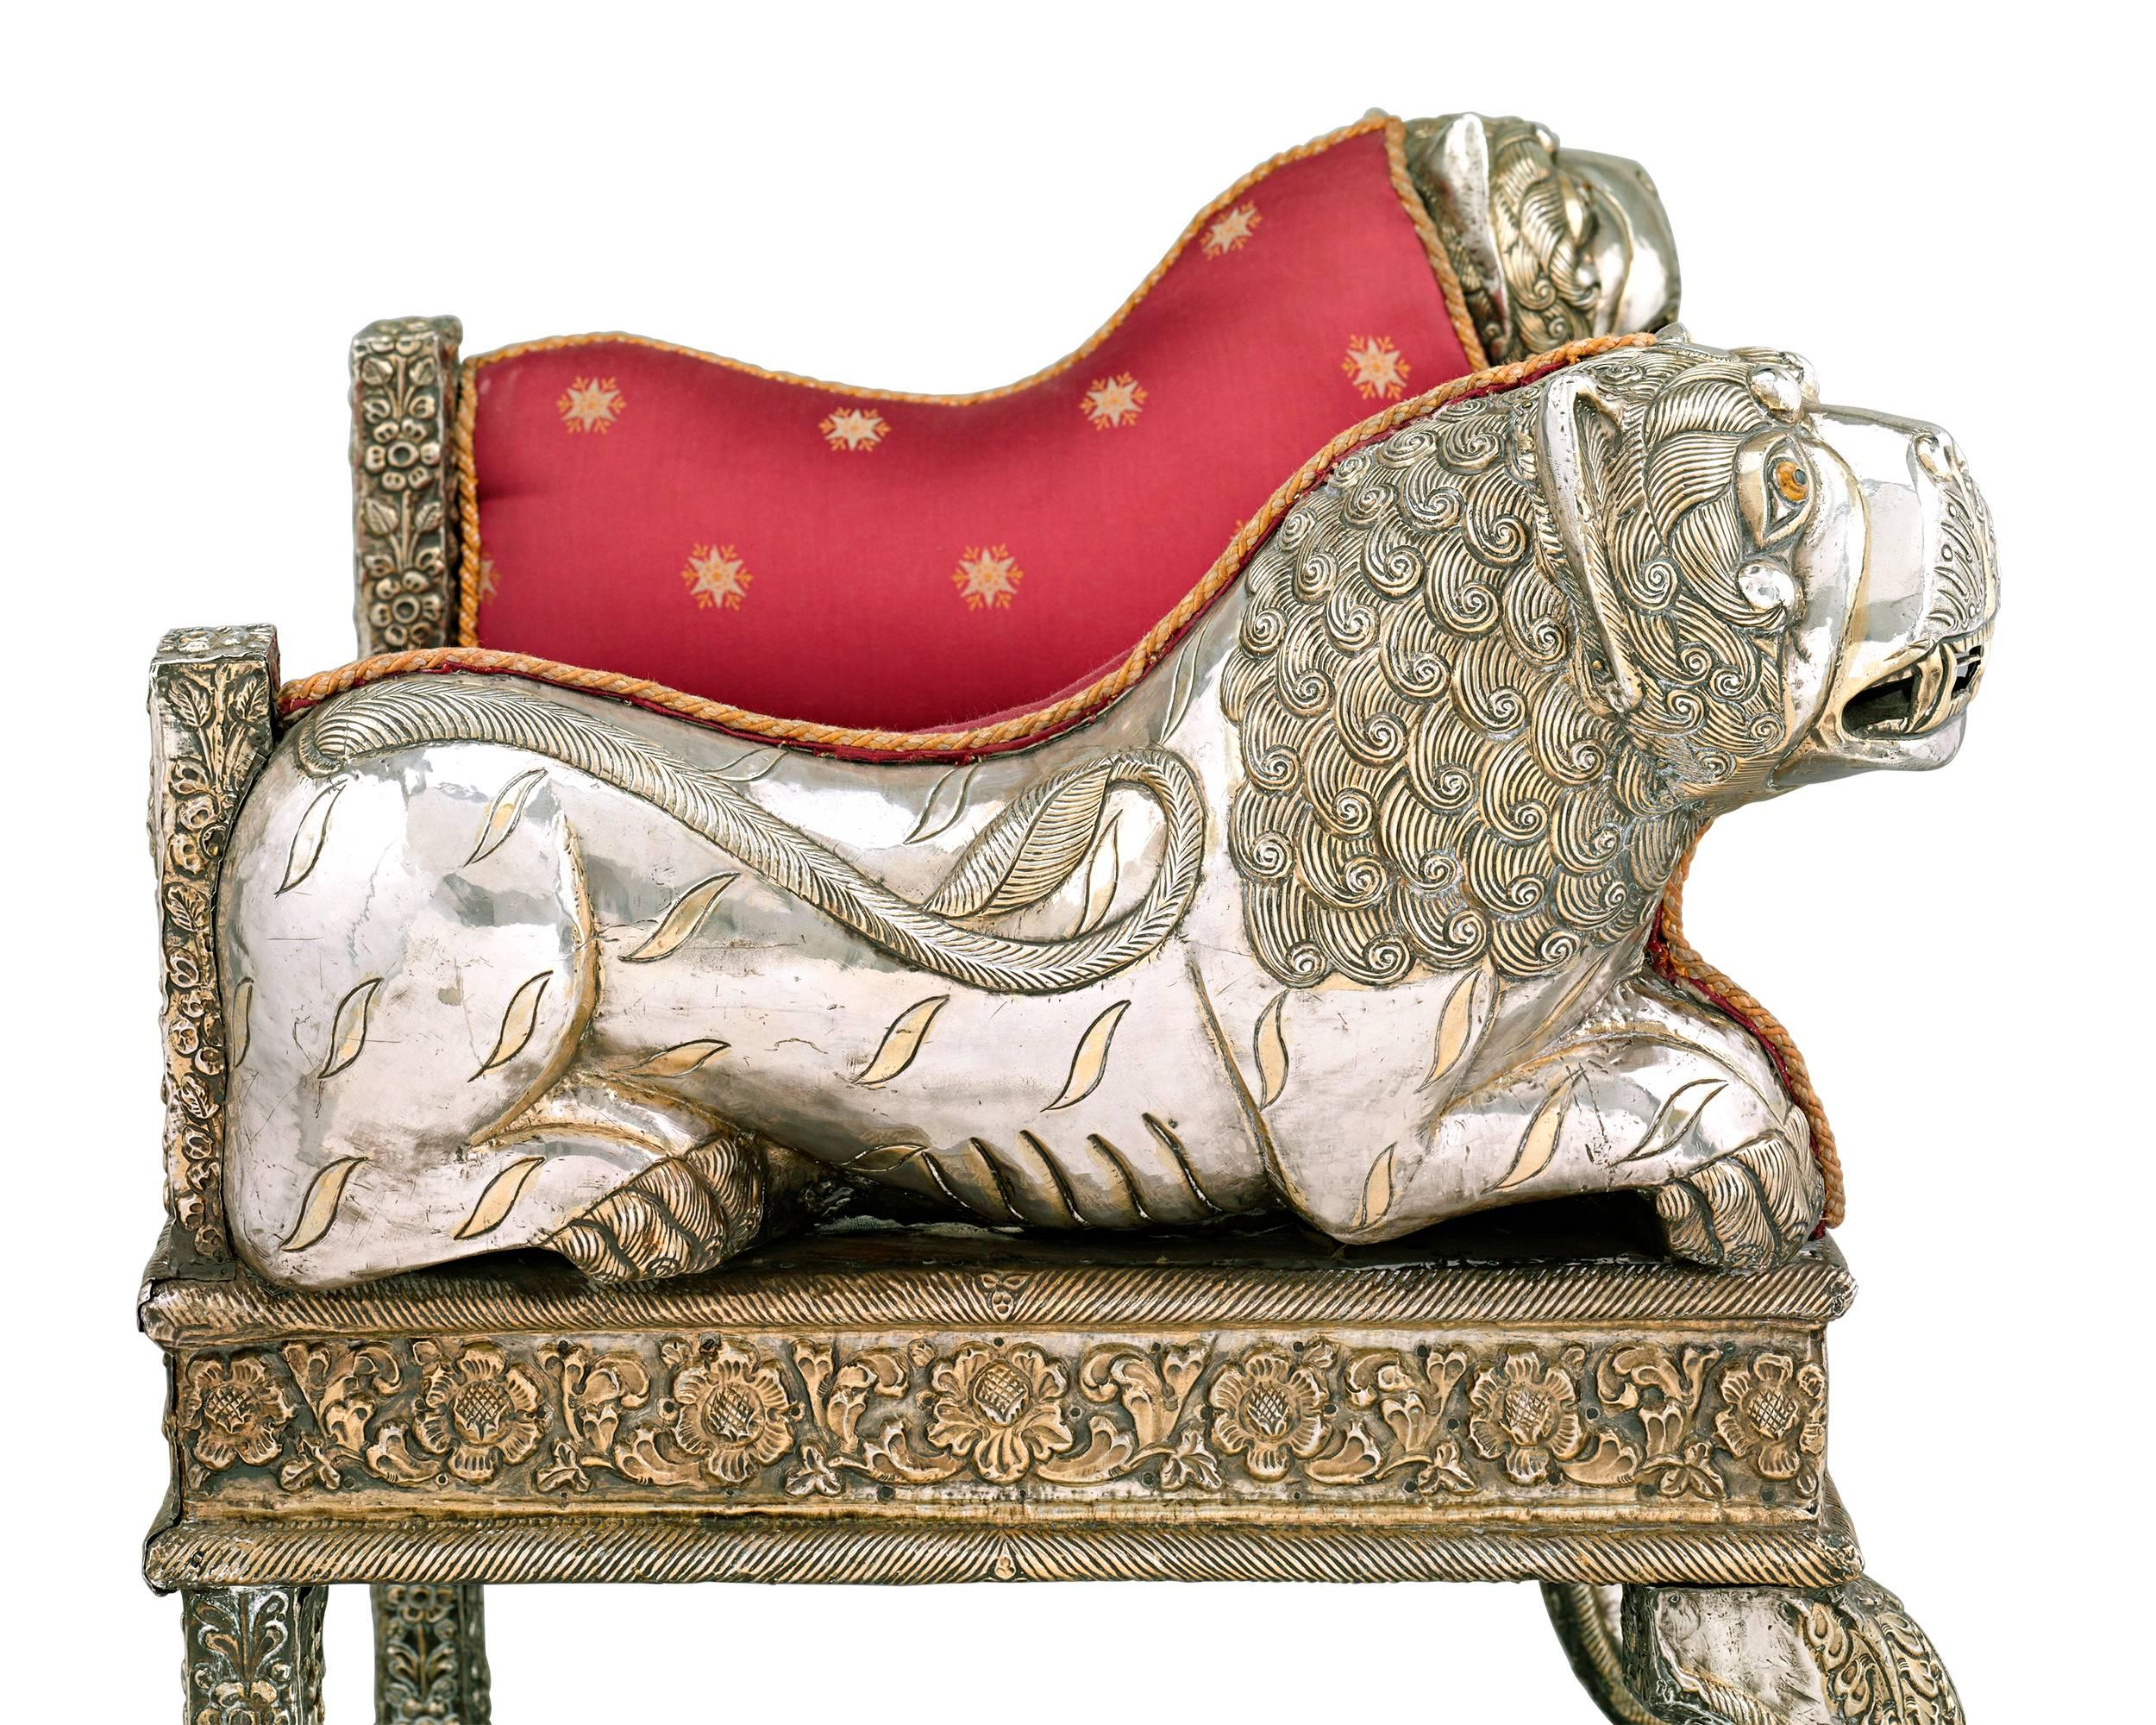 This rare Anglo-Indian silver chased seat is an elaborate and striking marriage of Western form with Eastern artistry. Covered entirely in marvellously worked silver with parcel gilding, the form of this chair is inspired by the English Regency